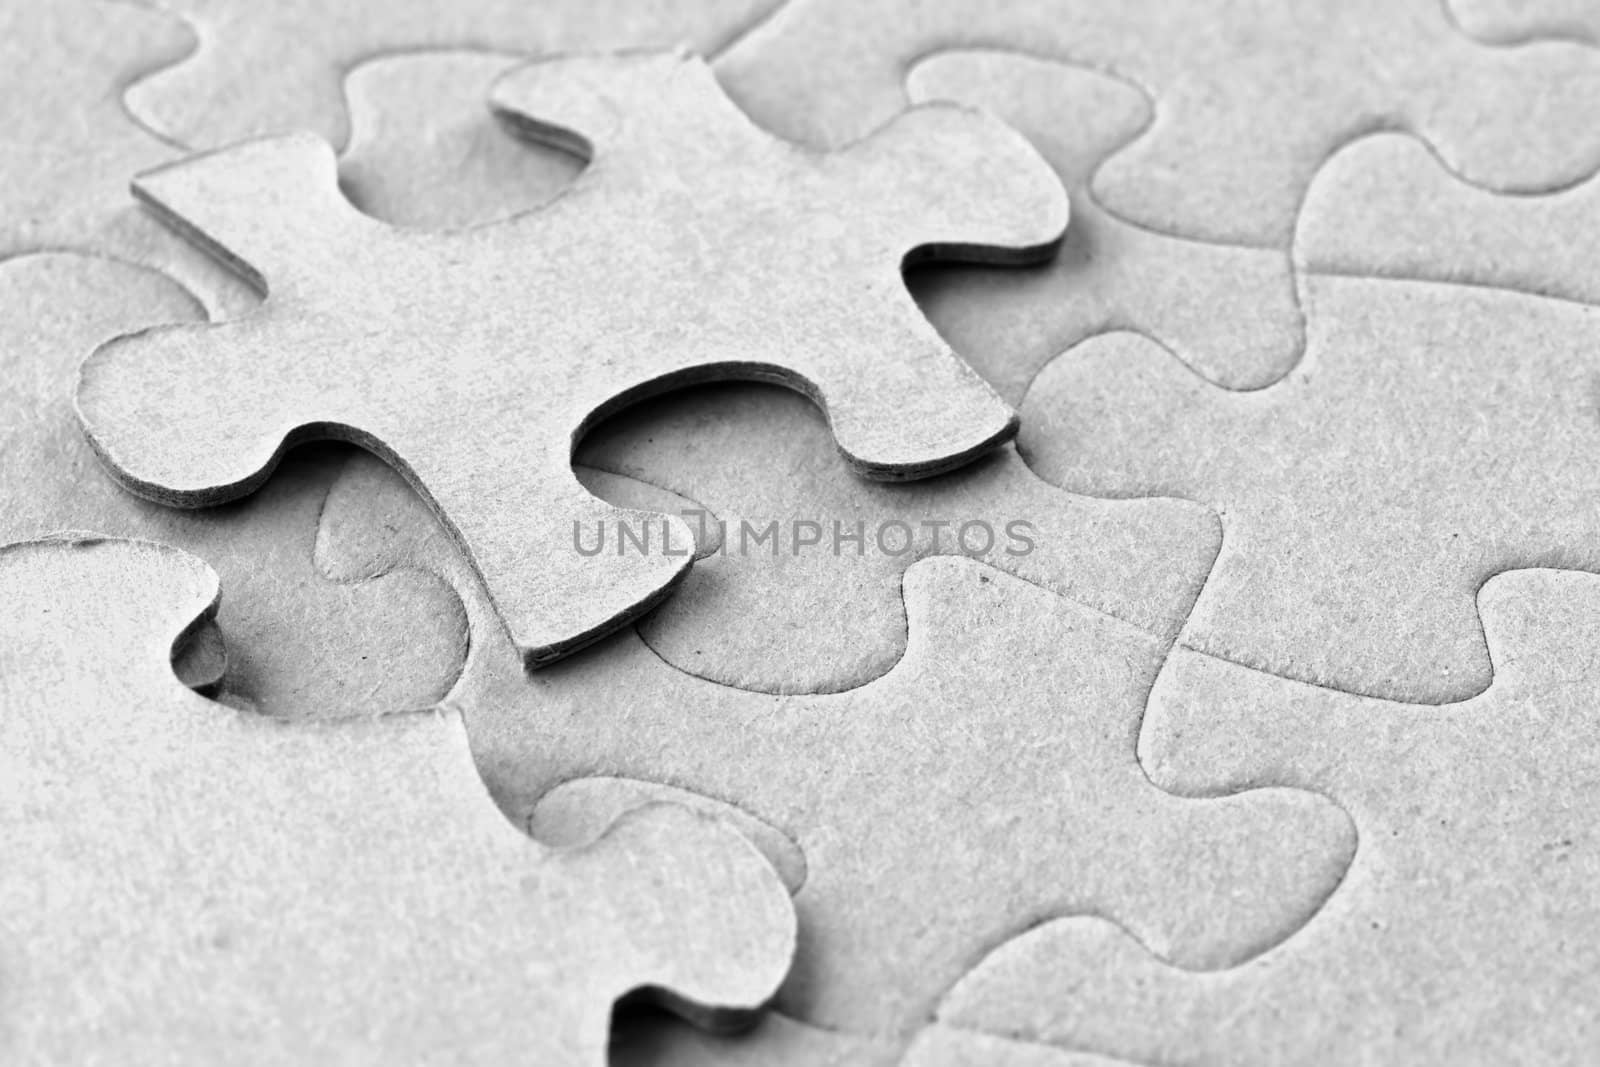 Photograph of blank grey cardboard jigsaw puzzle with two floating pieces on top, great material details.